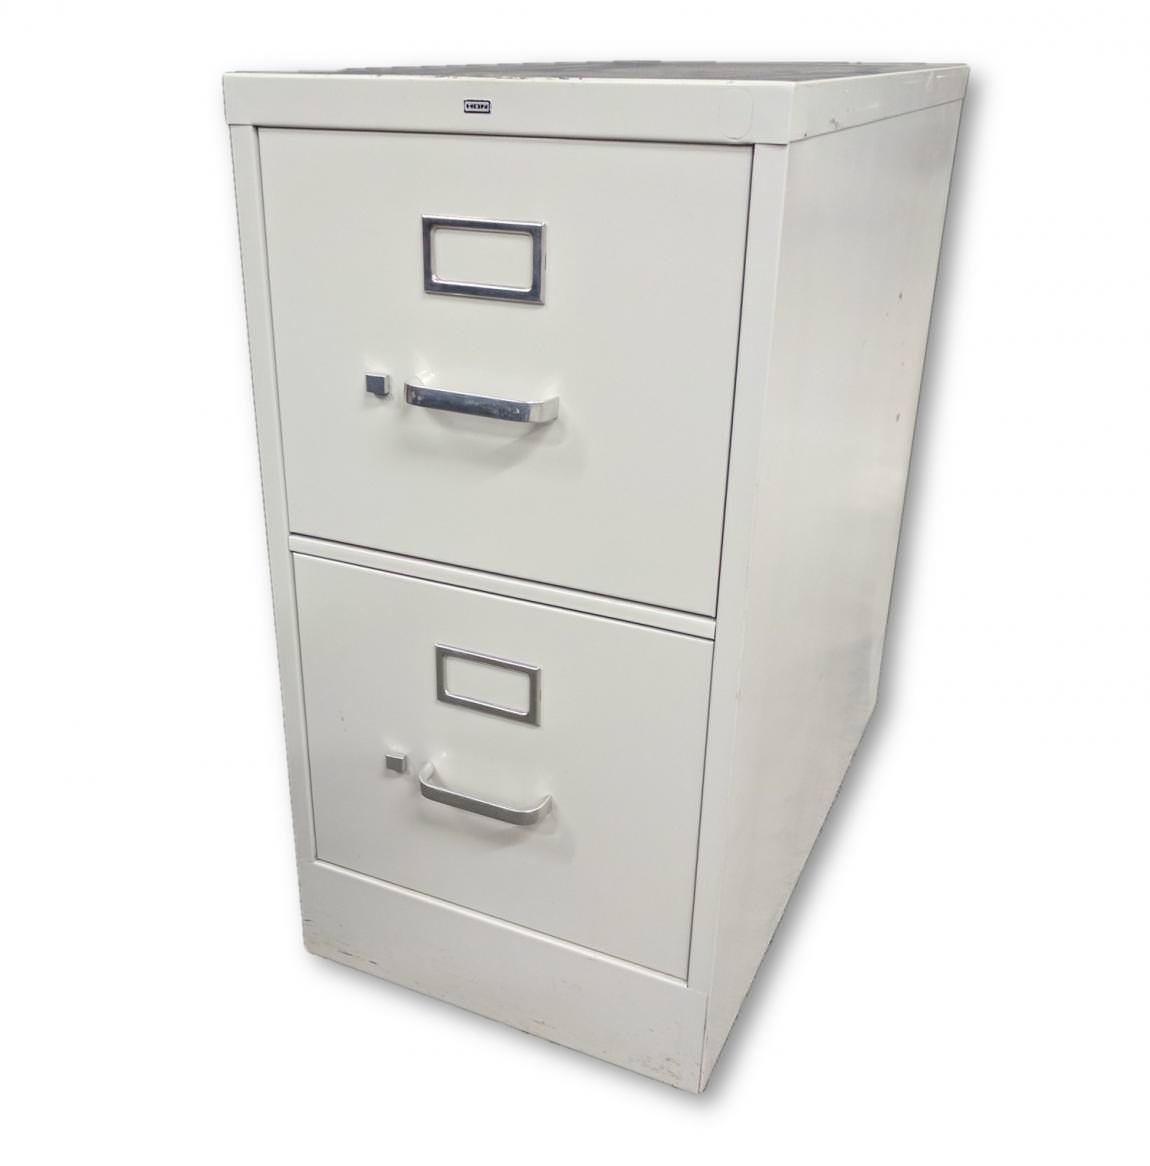 Putty Hon 2 Drawer Vertical File Cabinet